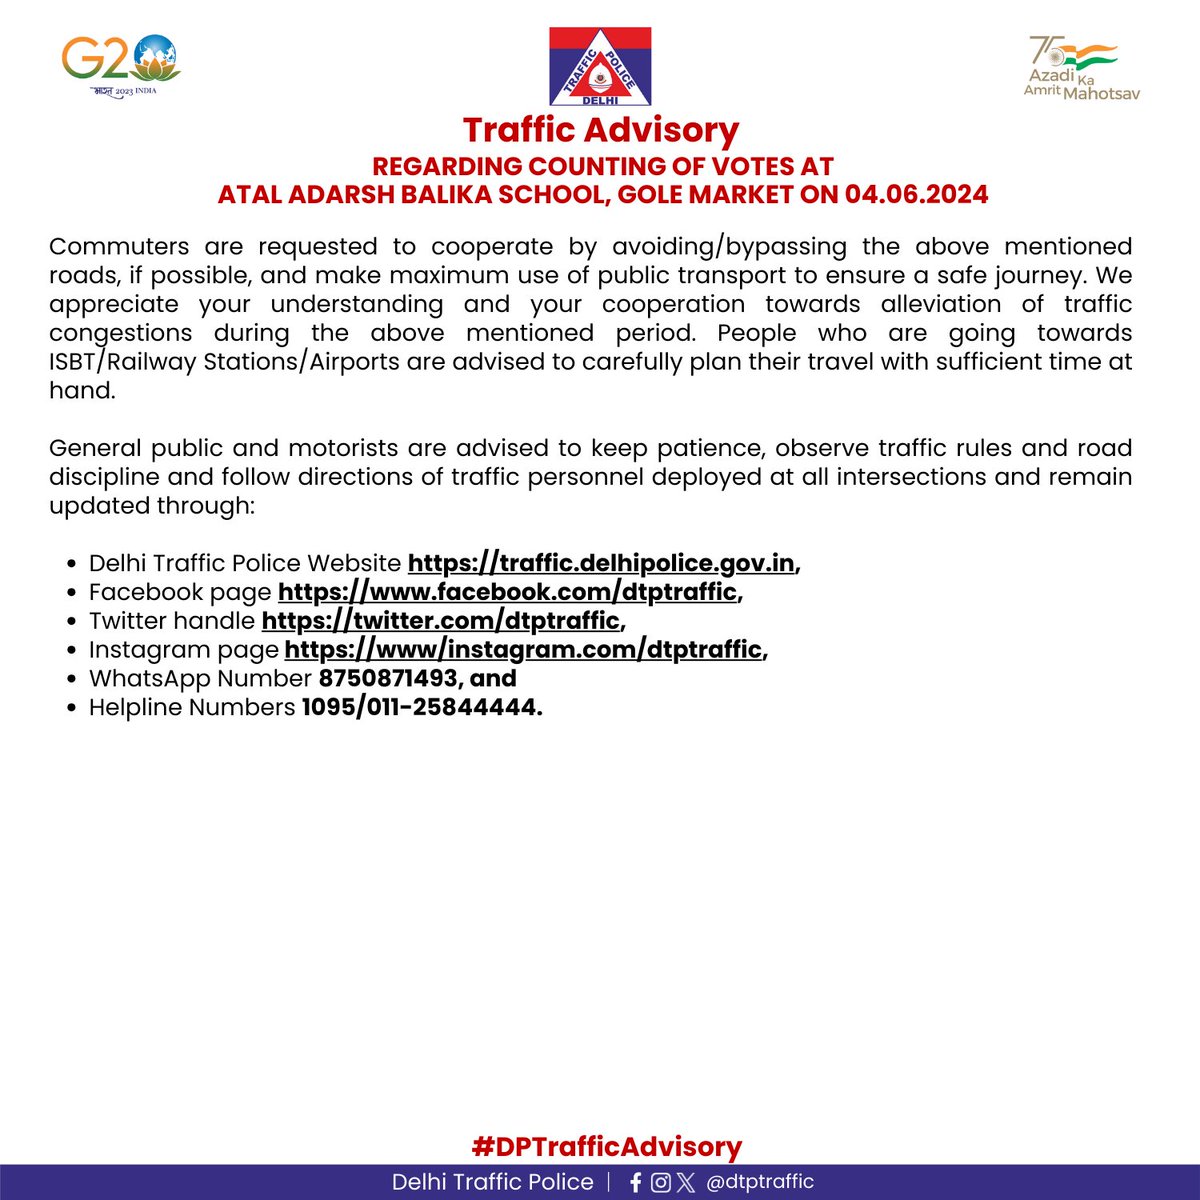 Traffic Advisory In view of counting of votes at Atal Adarsh Balika School, Gole Market on 04.06.2024, traffic restrictions and diversions will be effective. #DPTrafficAdvisory #LokSabhaElections2024